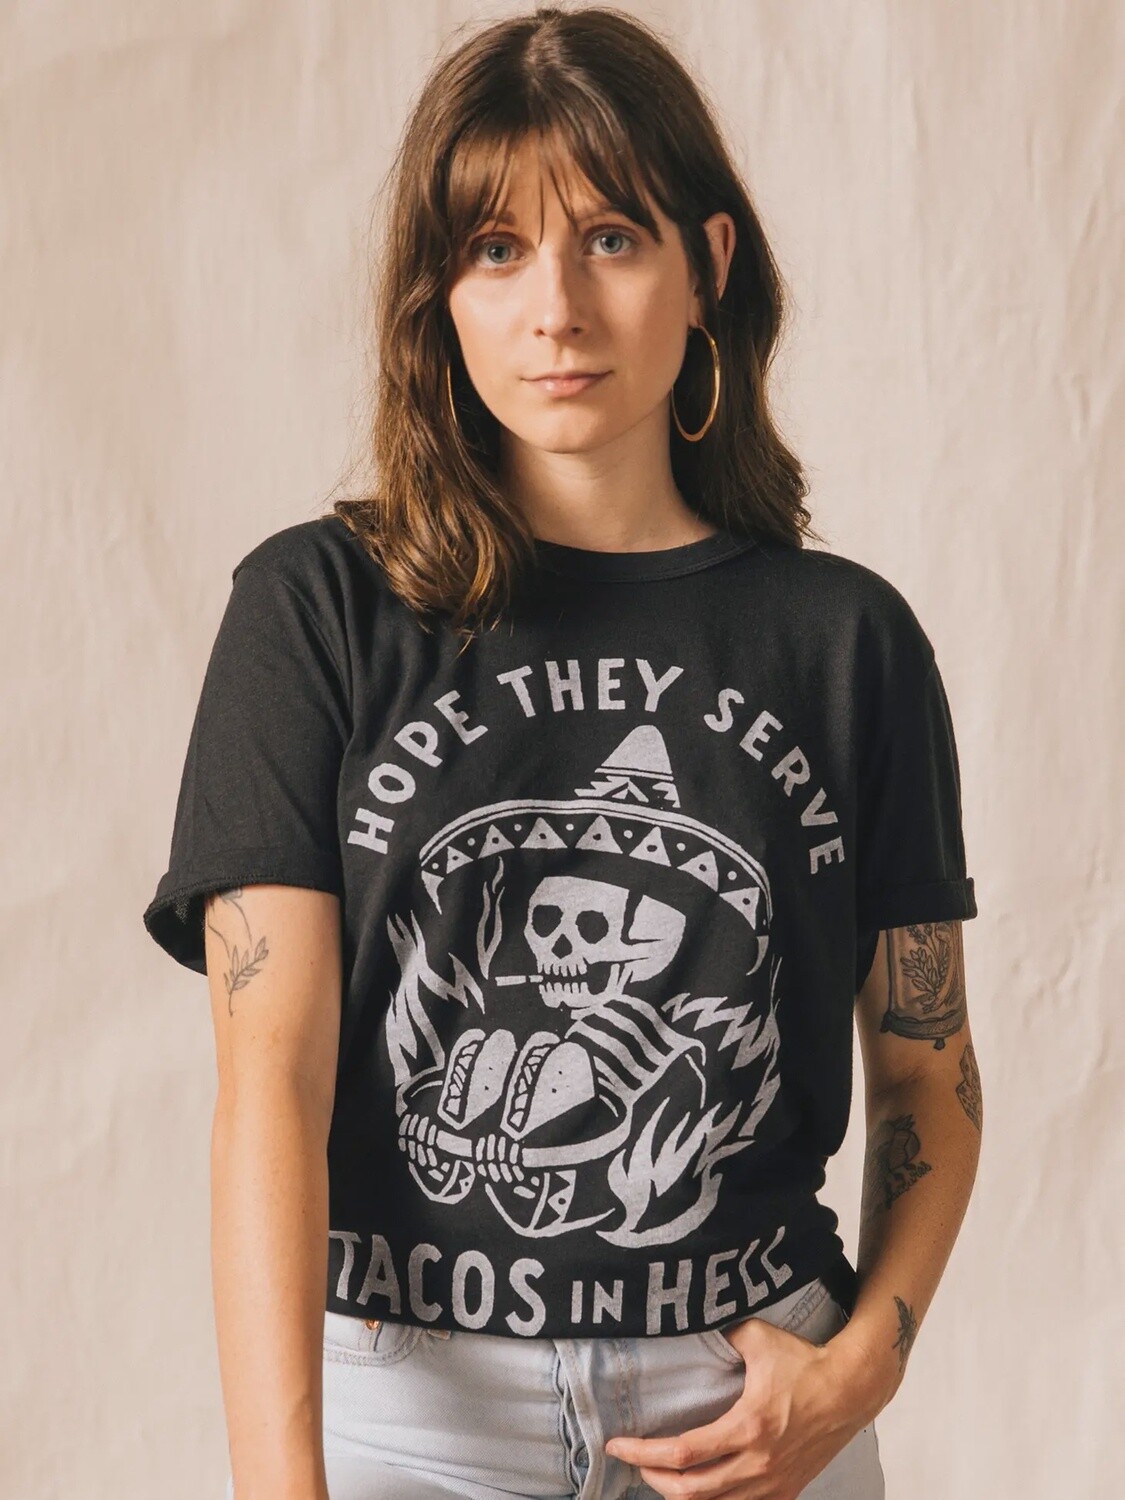 Hope They Serve Tacos In Hell Unisex Tee, Size: Small